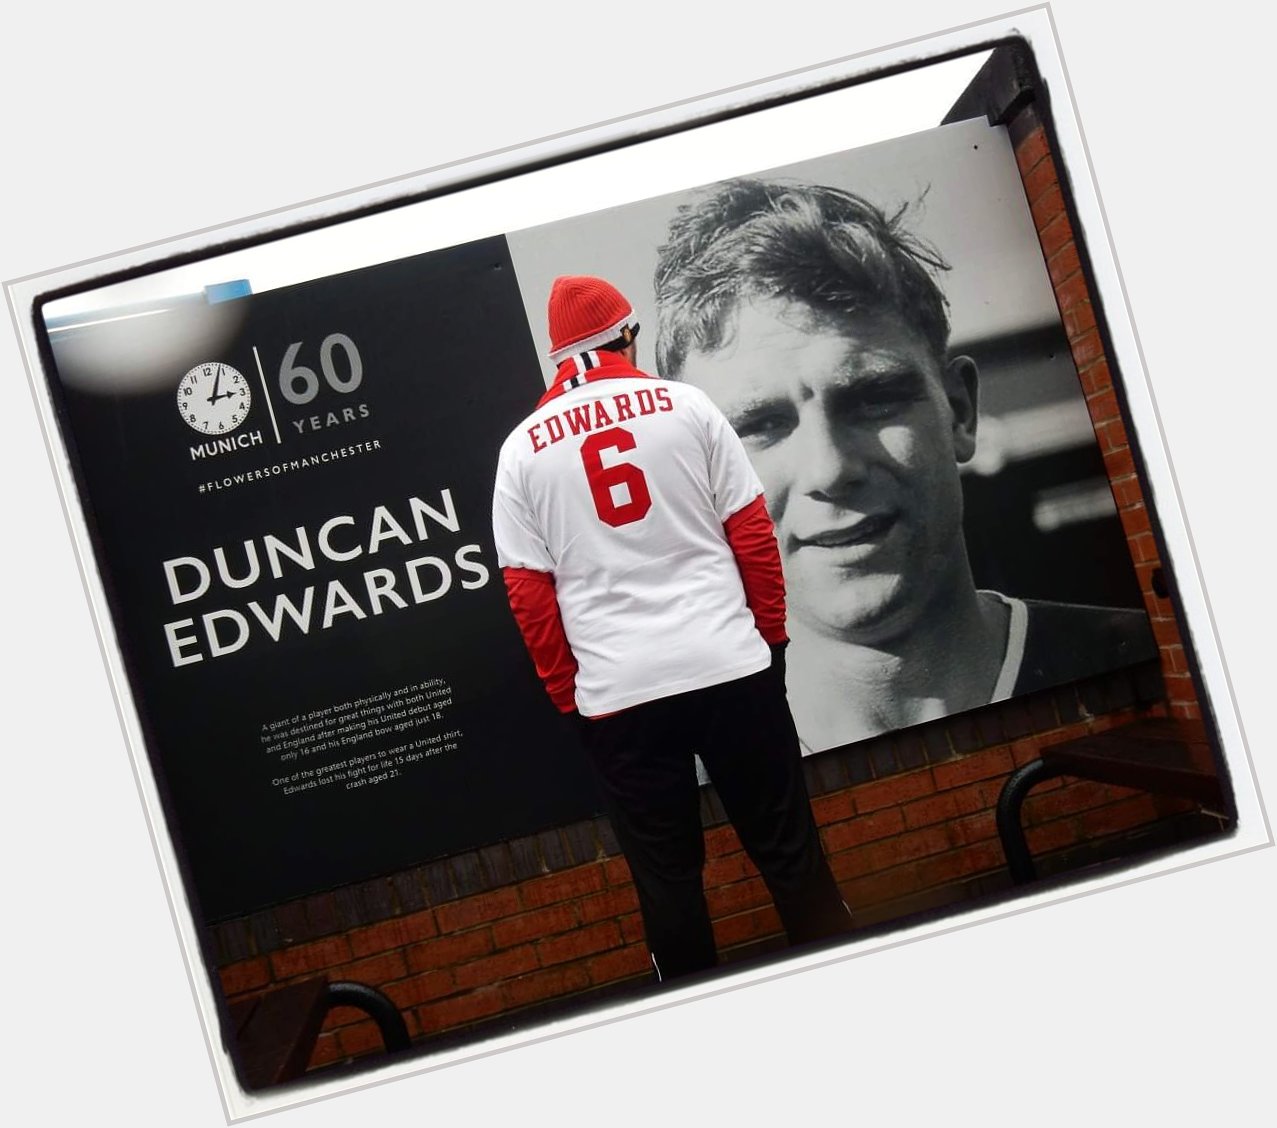  The Tank Duncan Edwards born 82 years ago today.
Happy Birthday Legend ! RIP 